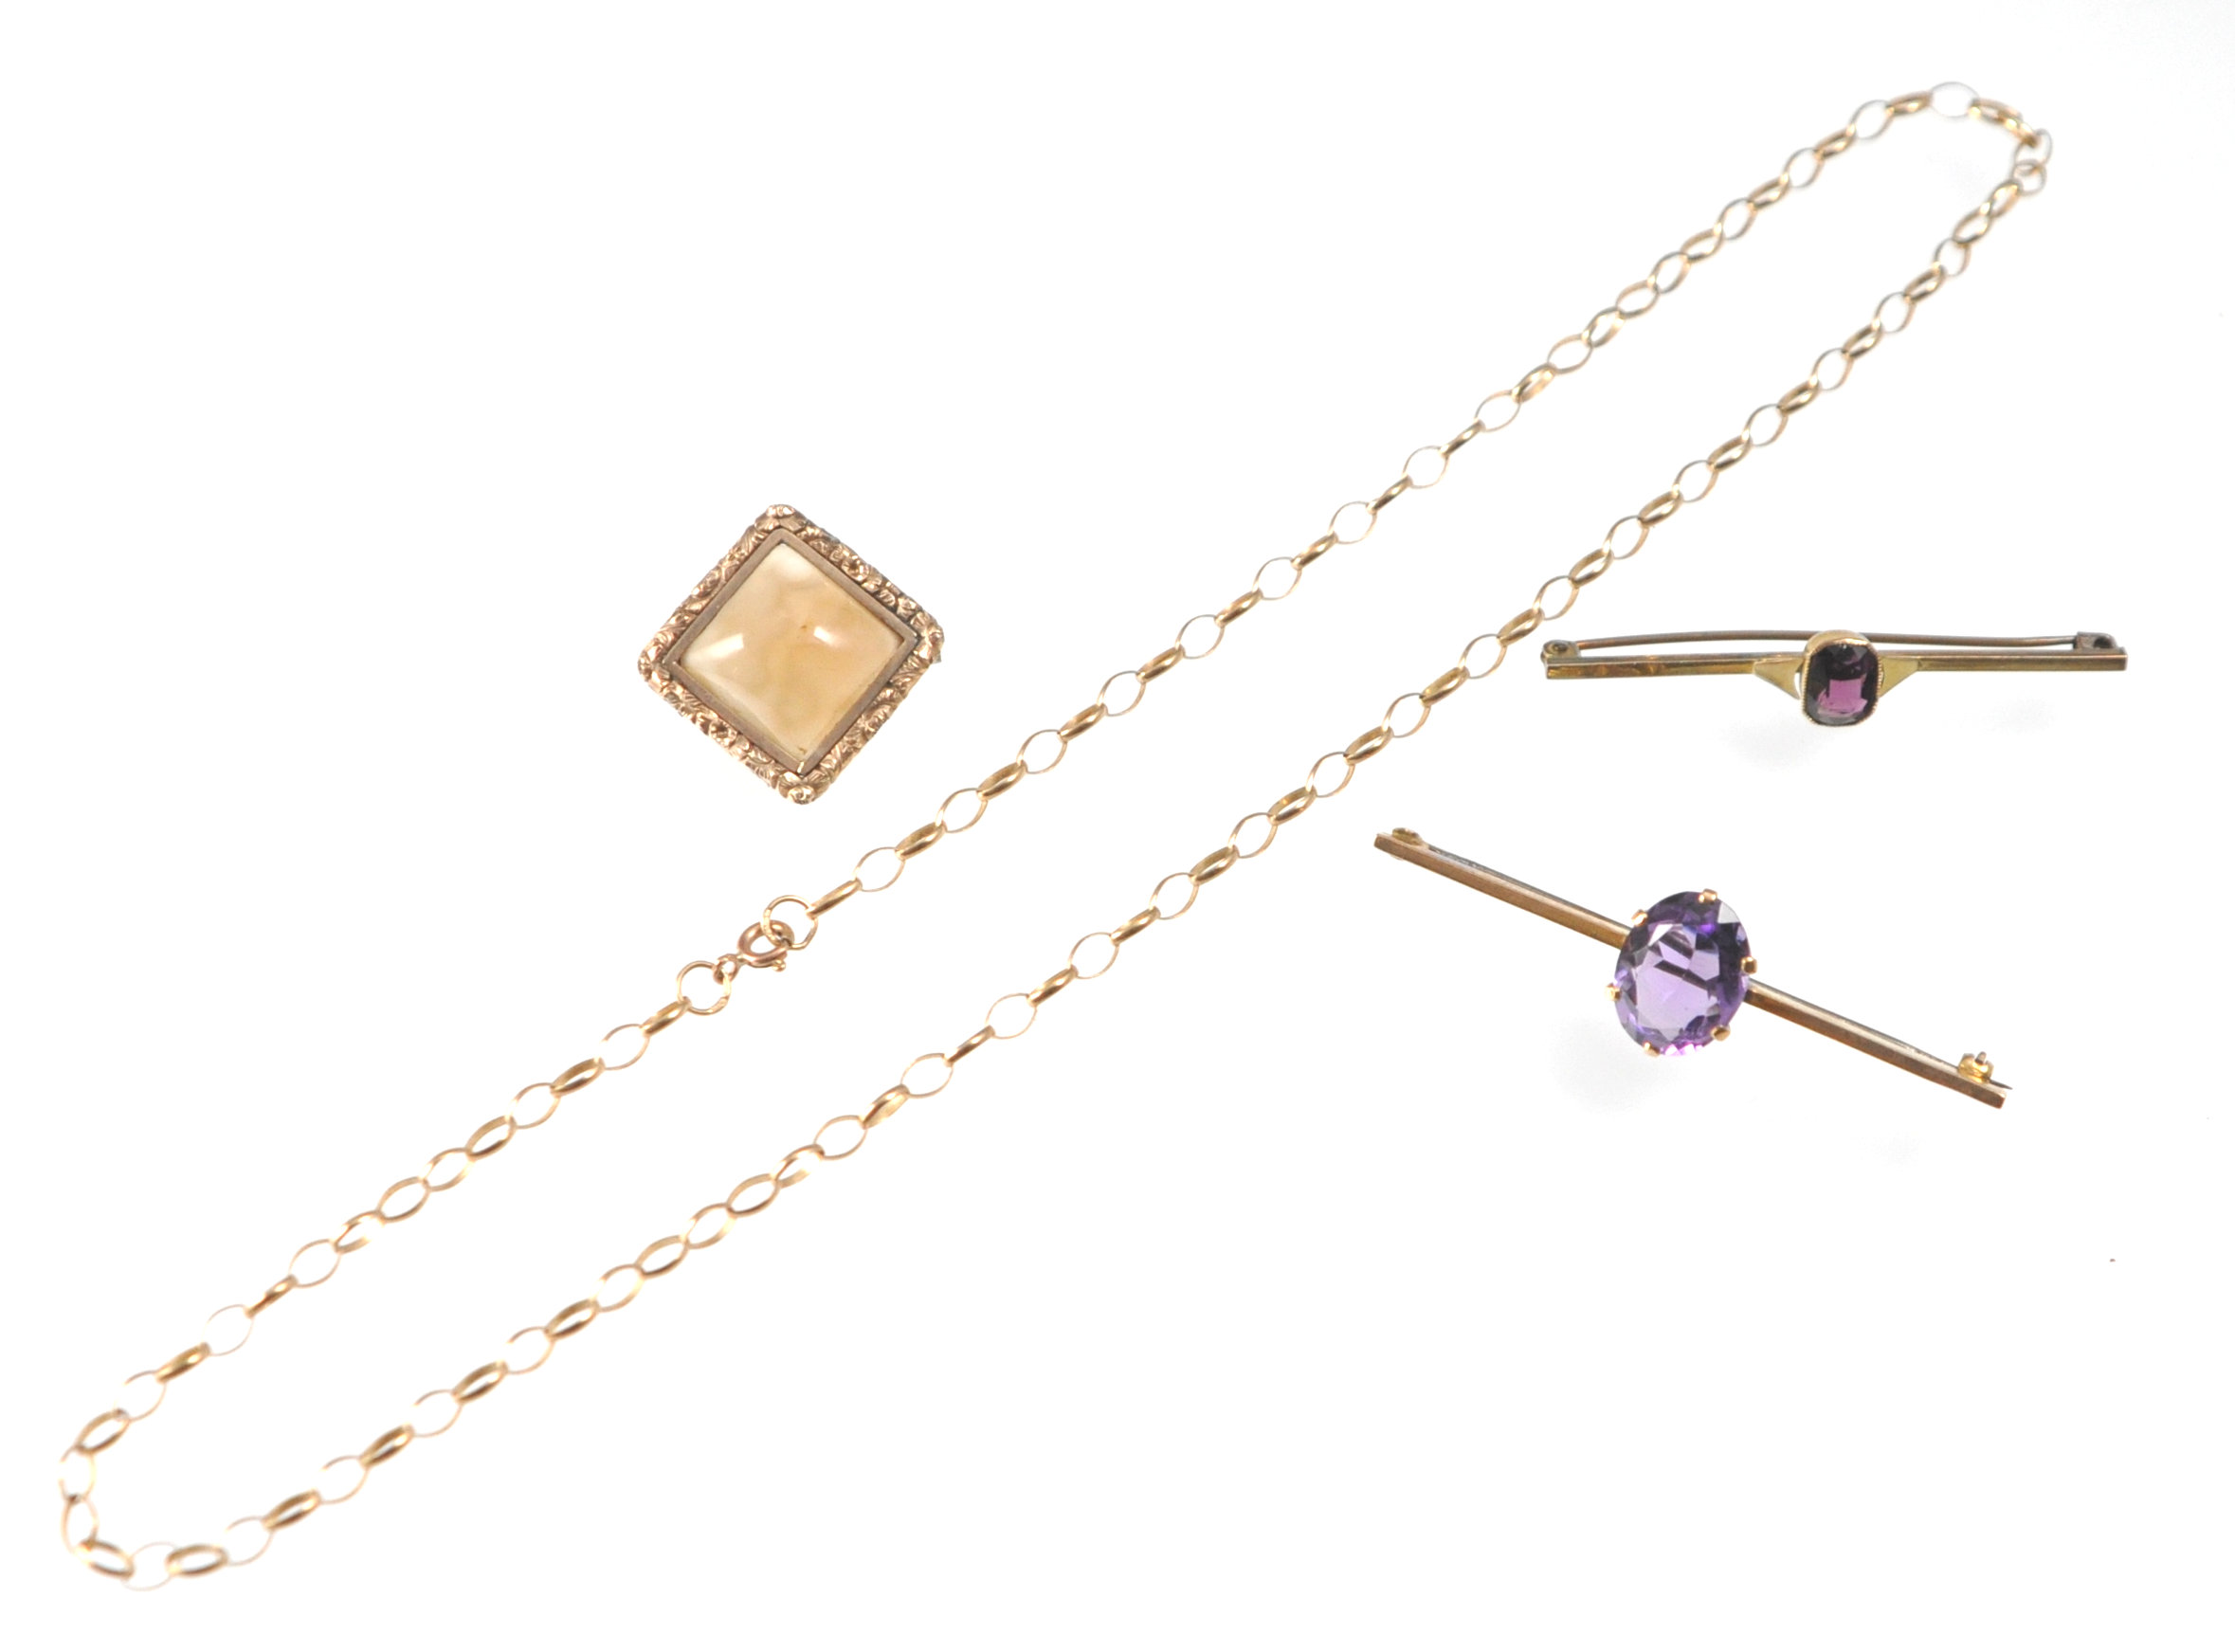 A collection of jewellery: A 9ct gold belcher chain; An agate brooch; Two amethyst bar brooches.